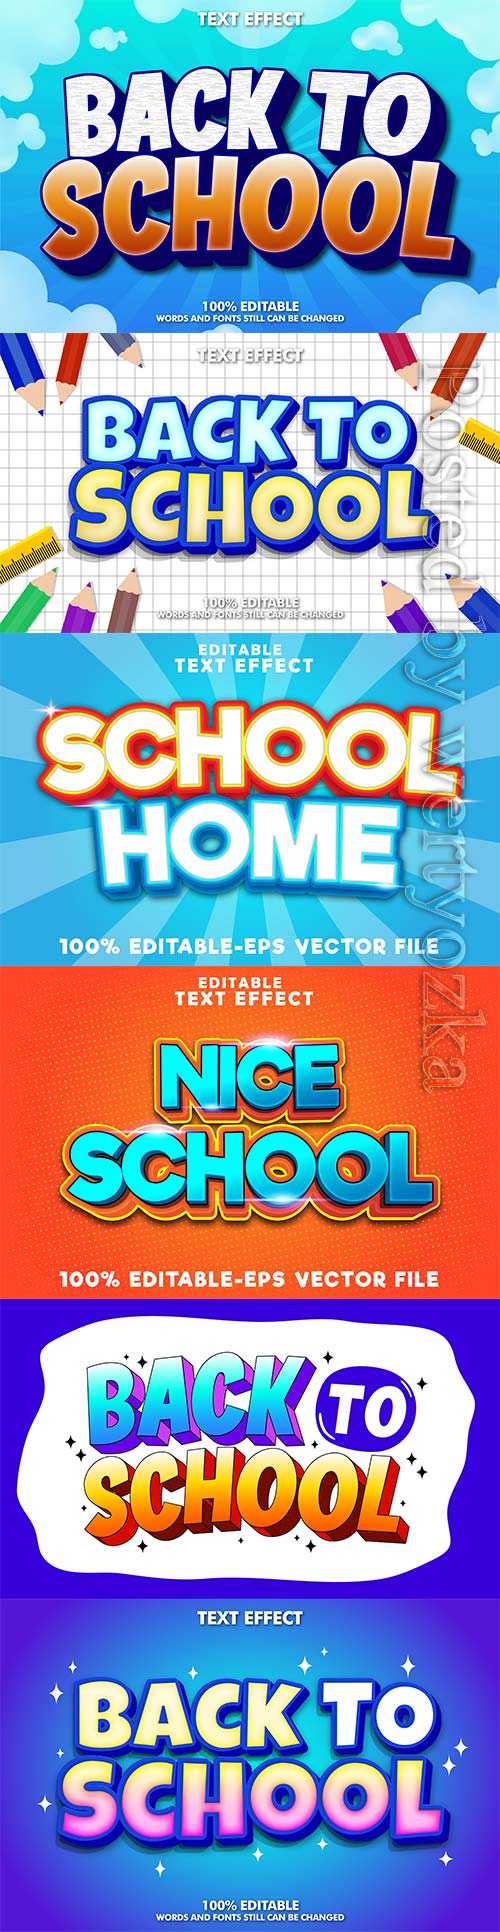 Back to school editable text effect vol 15